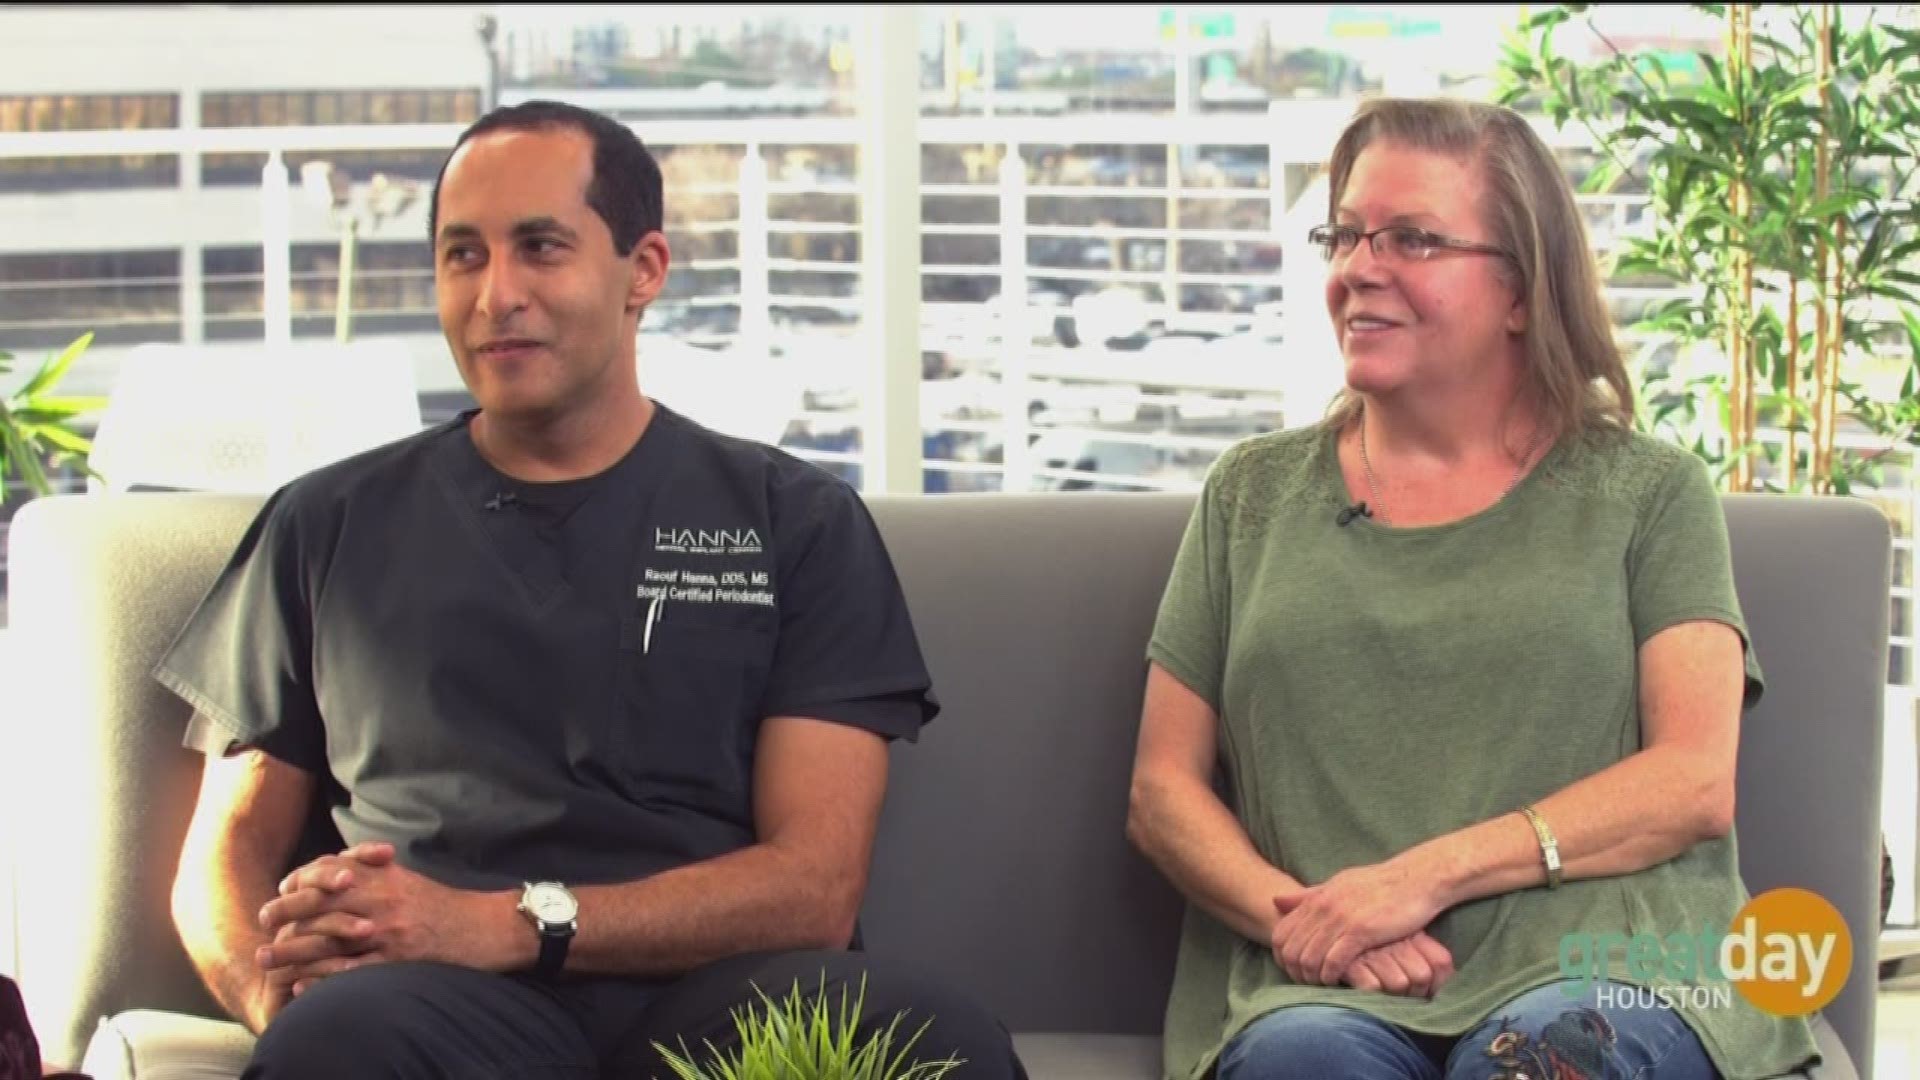 Periodontist Dr. Raouf Hanna discusses his patient, Marilyn Compton, and the incredible work that went into her new smile